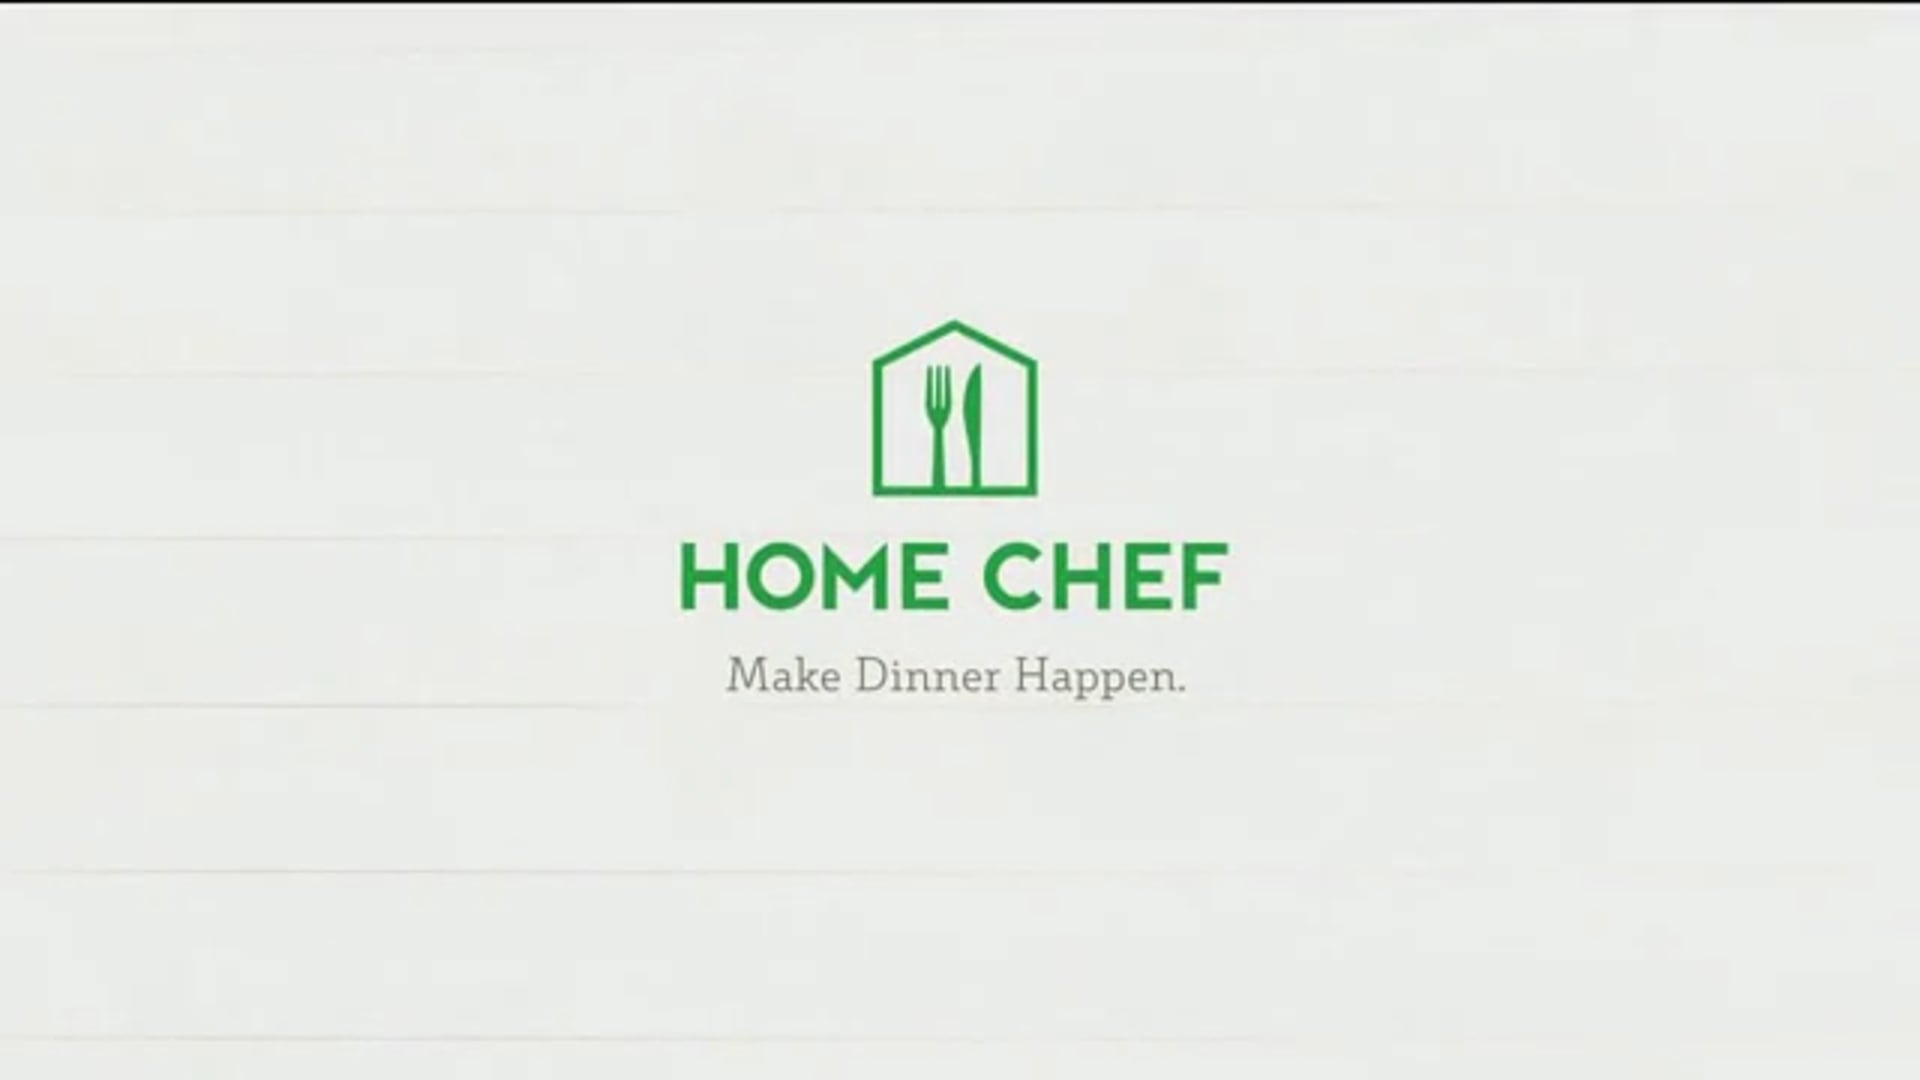 Home Chef - Making Things Happen